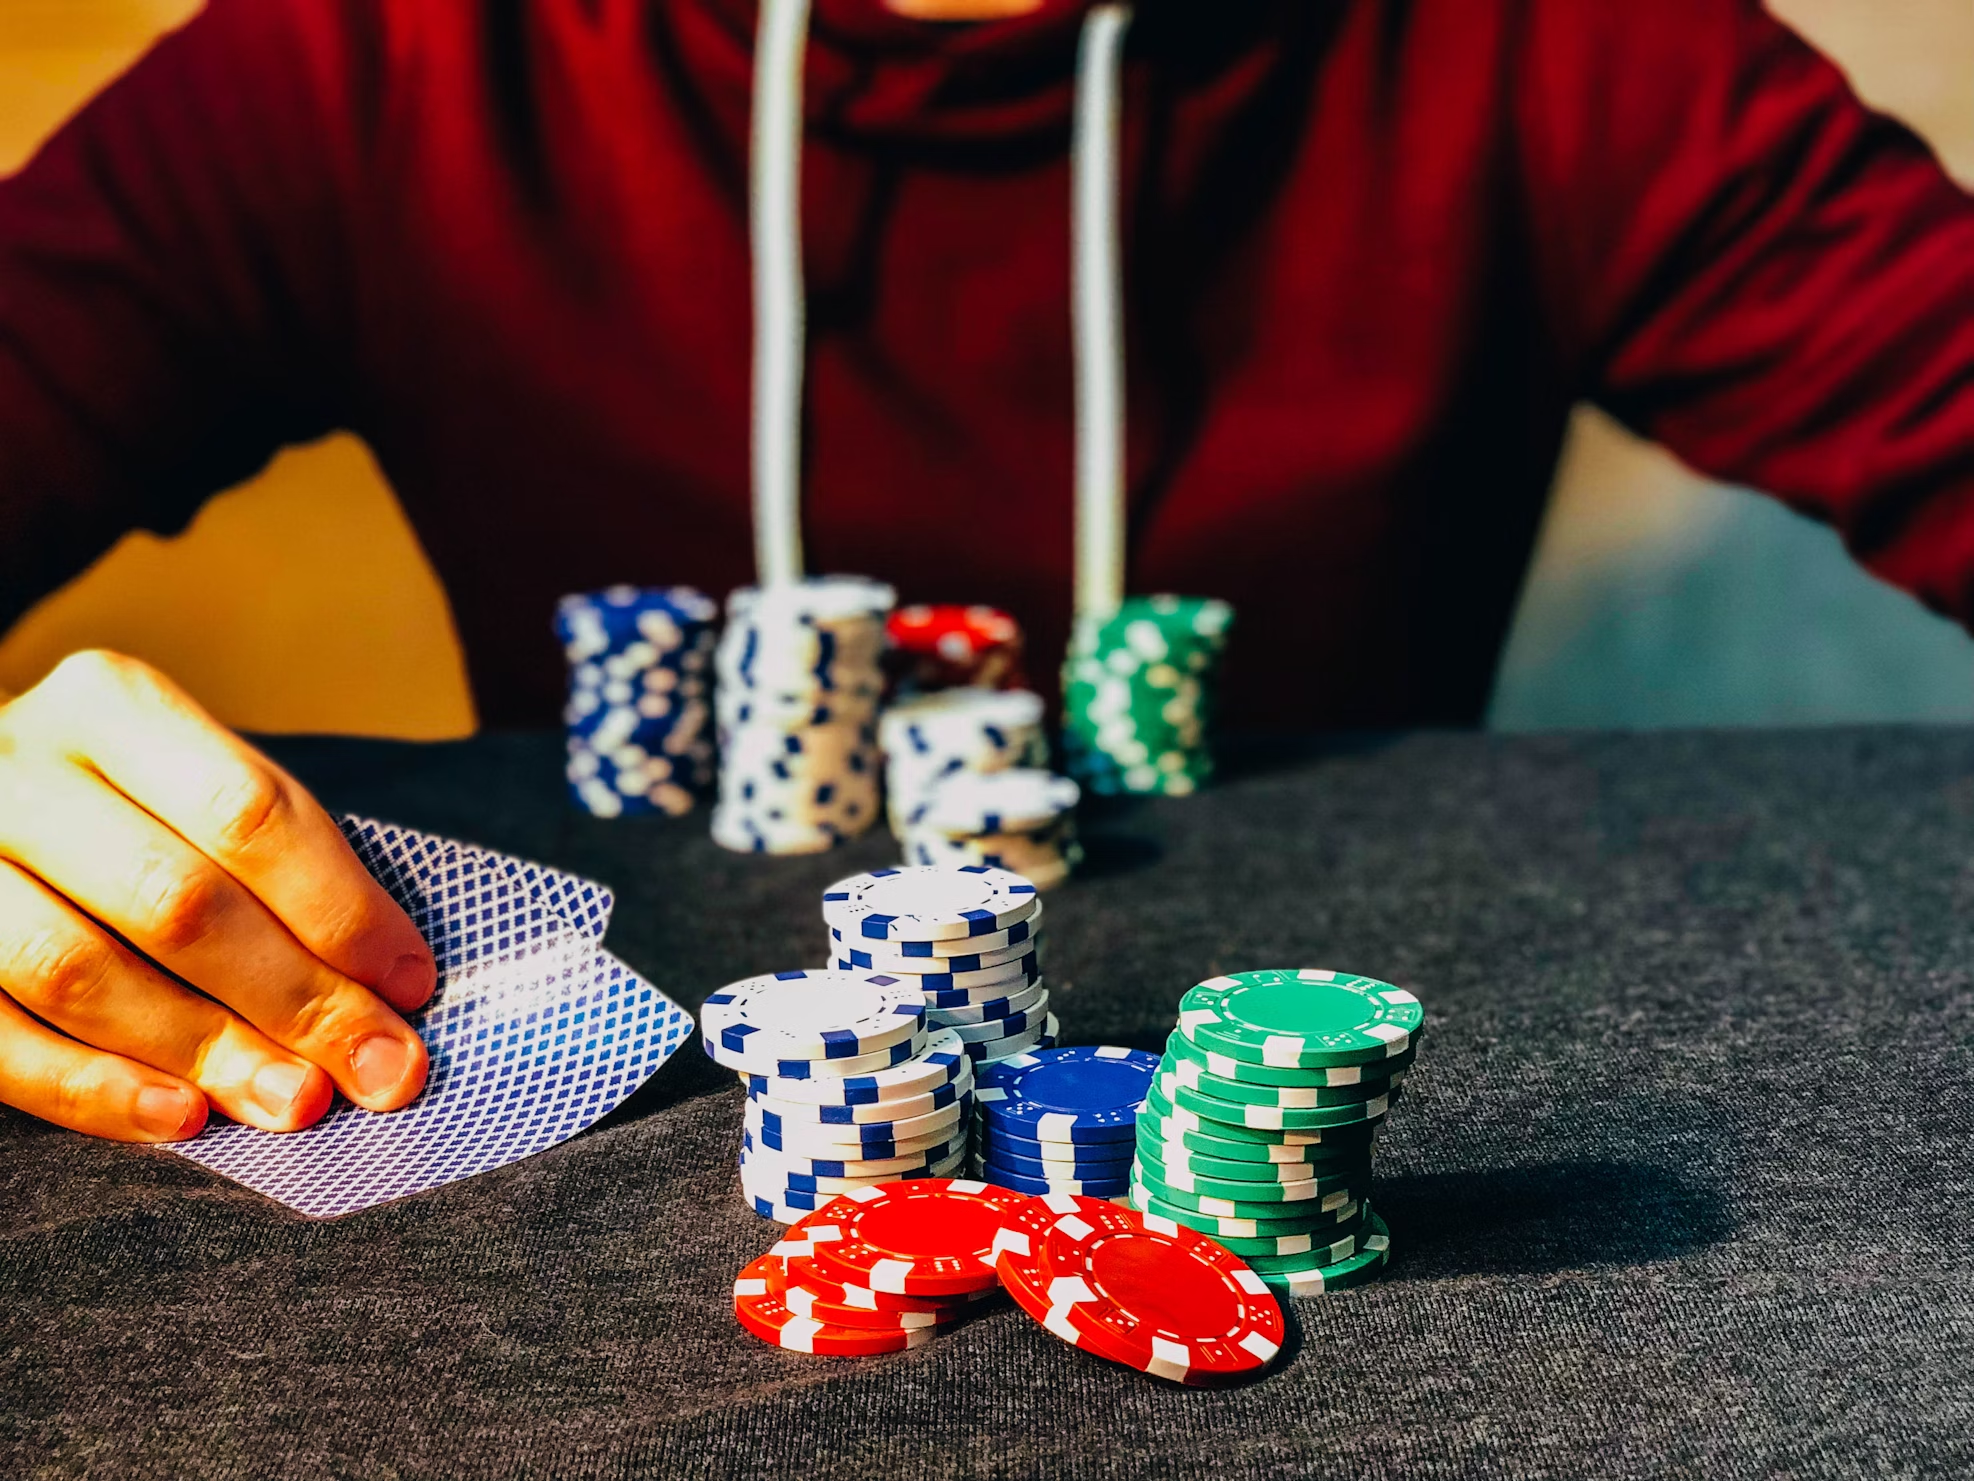 How to Get Started and Place Your First Bet